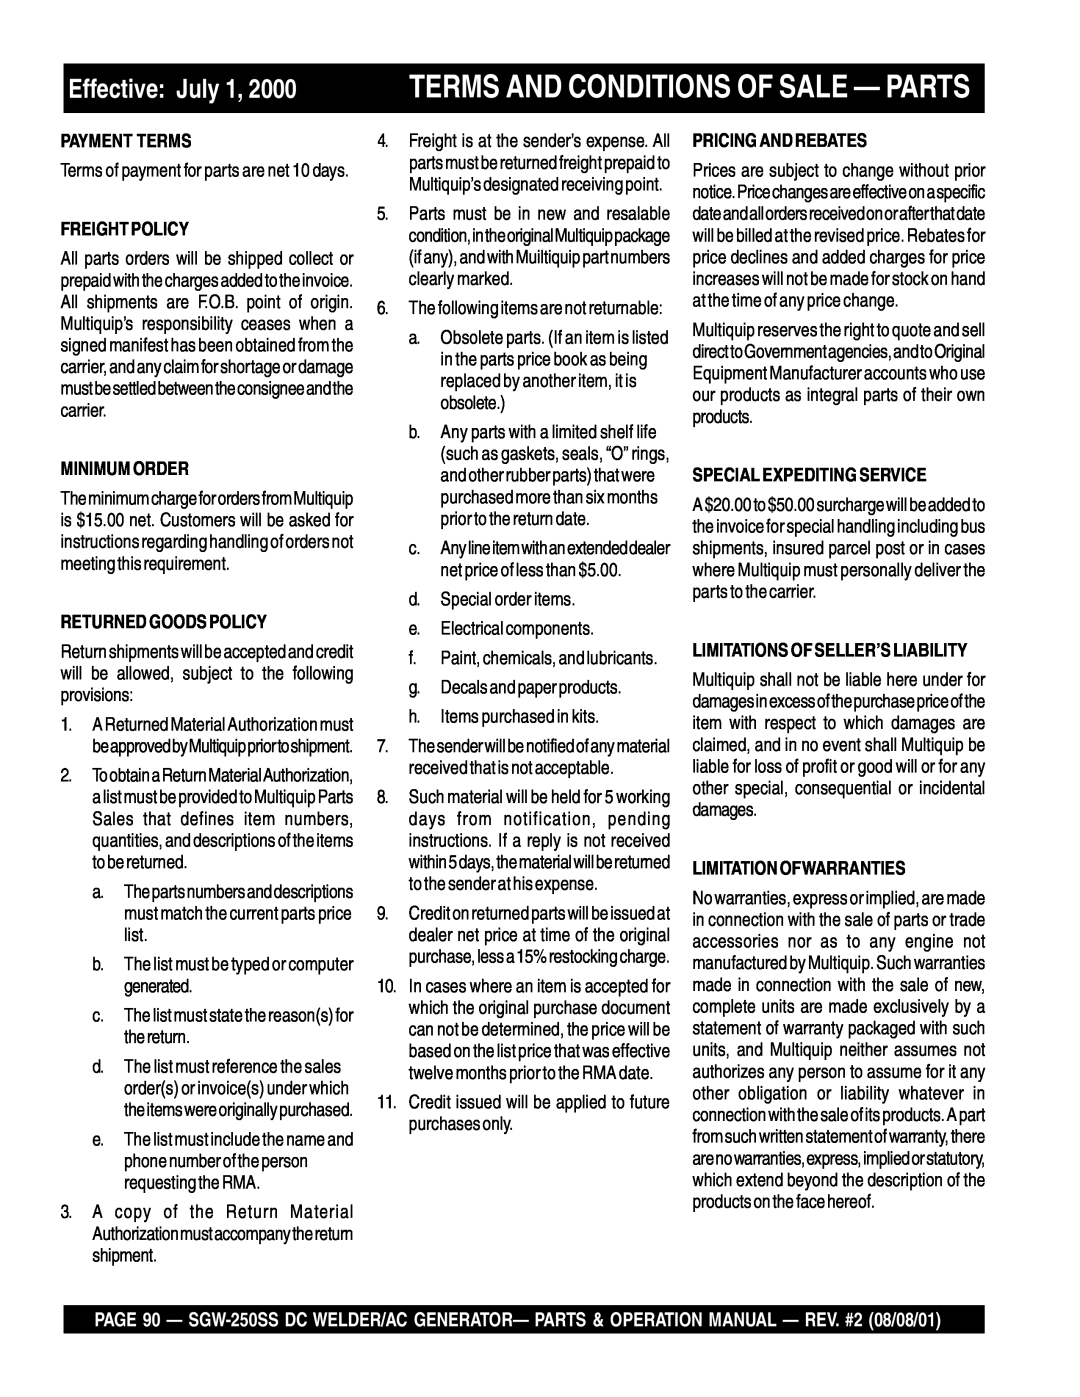 Multiquip SGW-250SS Effective July, Terms And Conditions Of Sale - Parts, b.The list must be typed or computer generated 